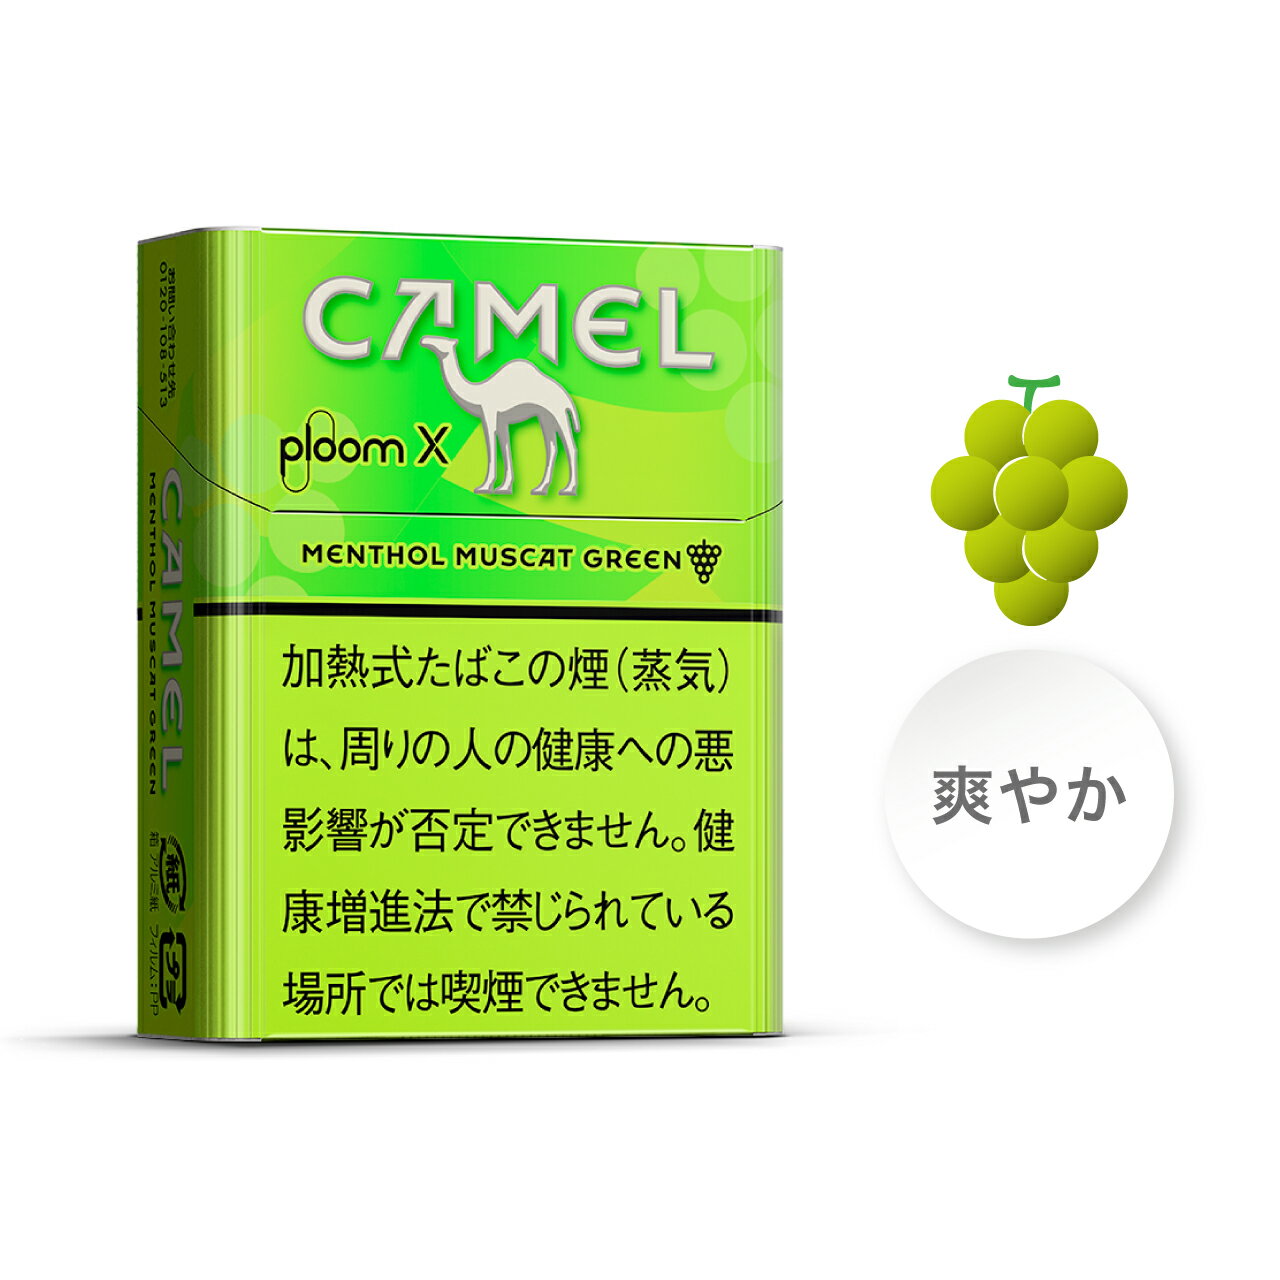 international delivery available 200Sticks Camel Menthol Muscat Green Ploom X